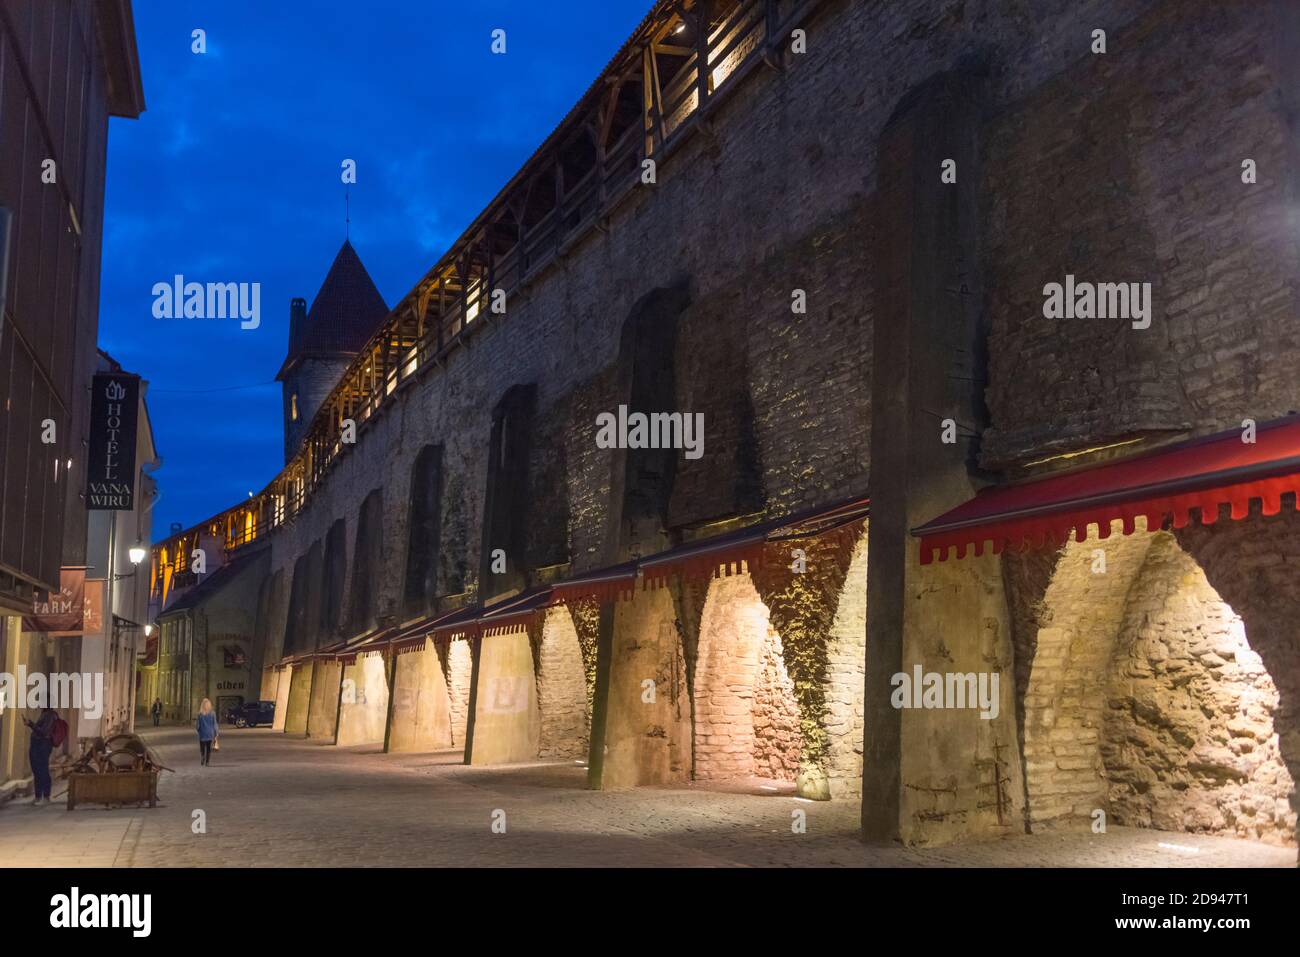 Night view of medieval tower and city wall in the old town, Tallinn, Estonia Stock Photo